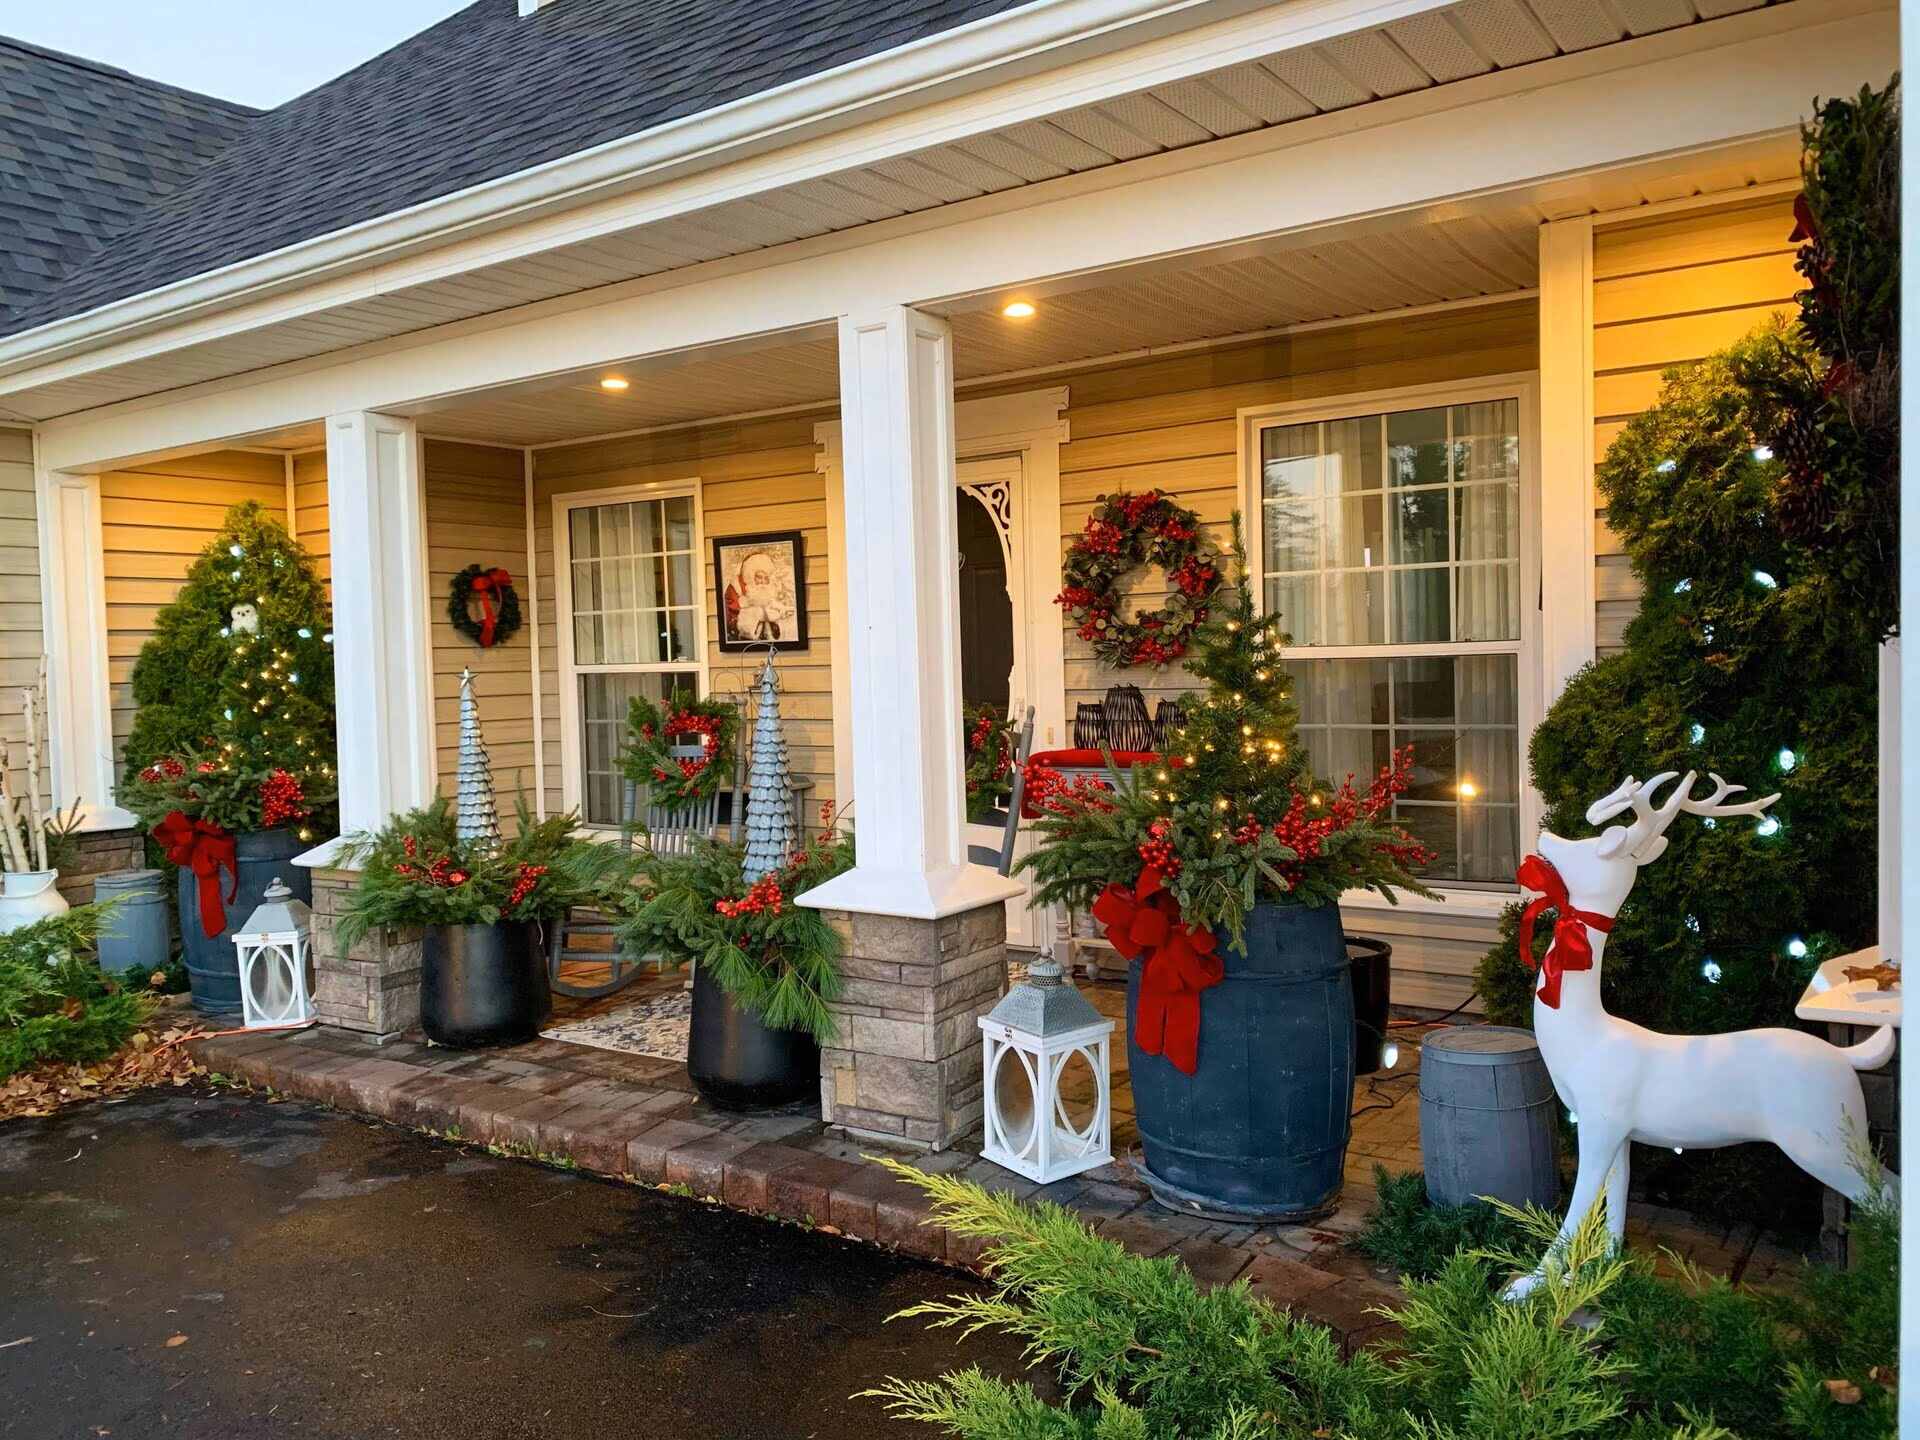 How To Keep Porch Decorations From Blowing Over